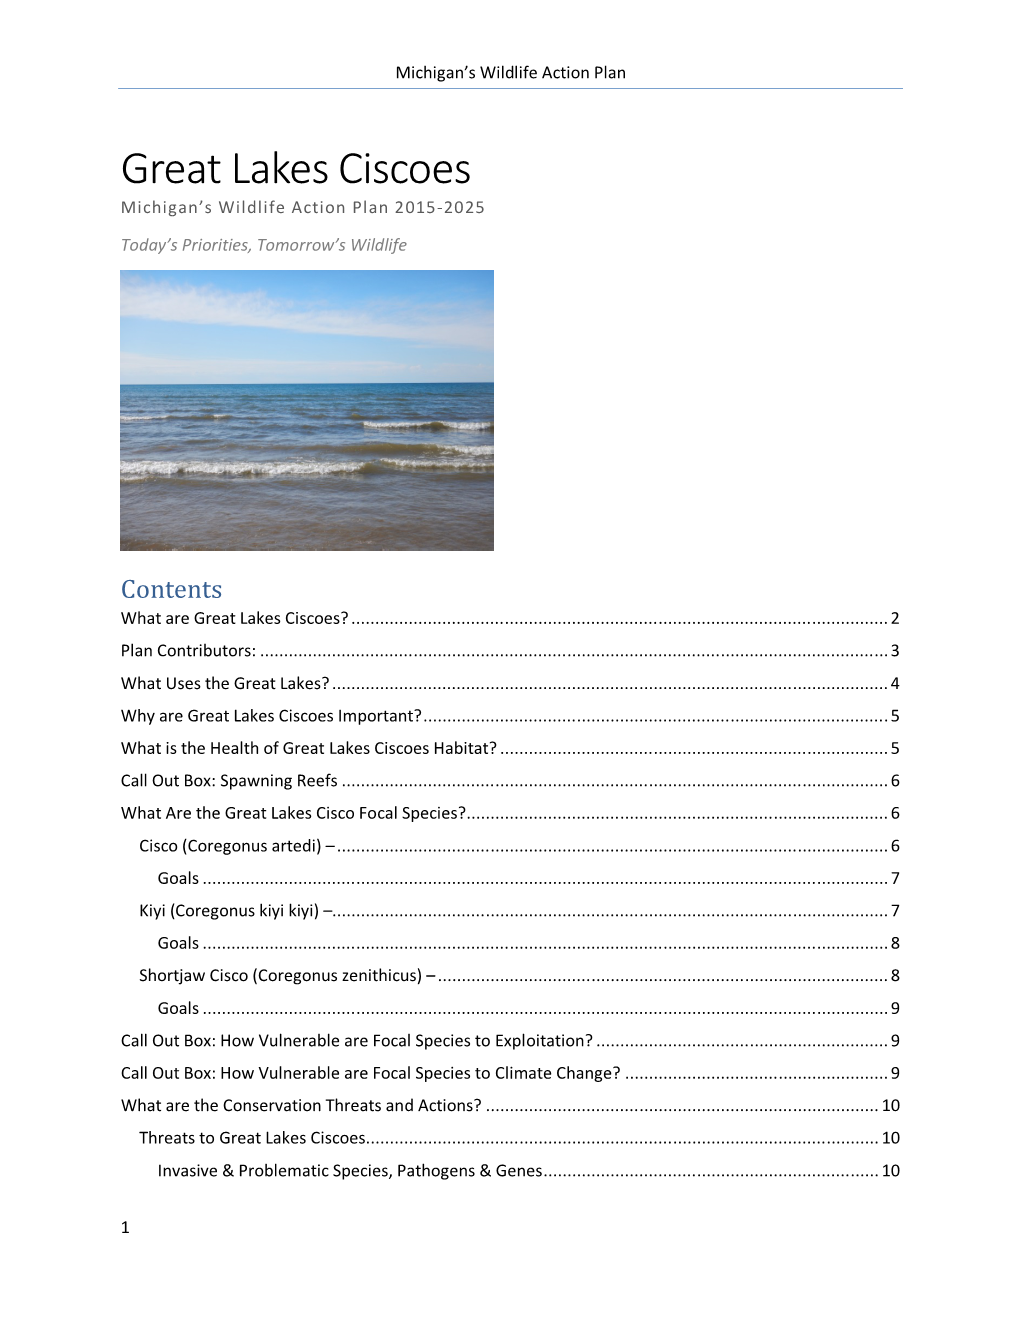 Wildlife Action Plan: Great Lakes Ciscoes (Accessible)